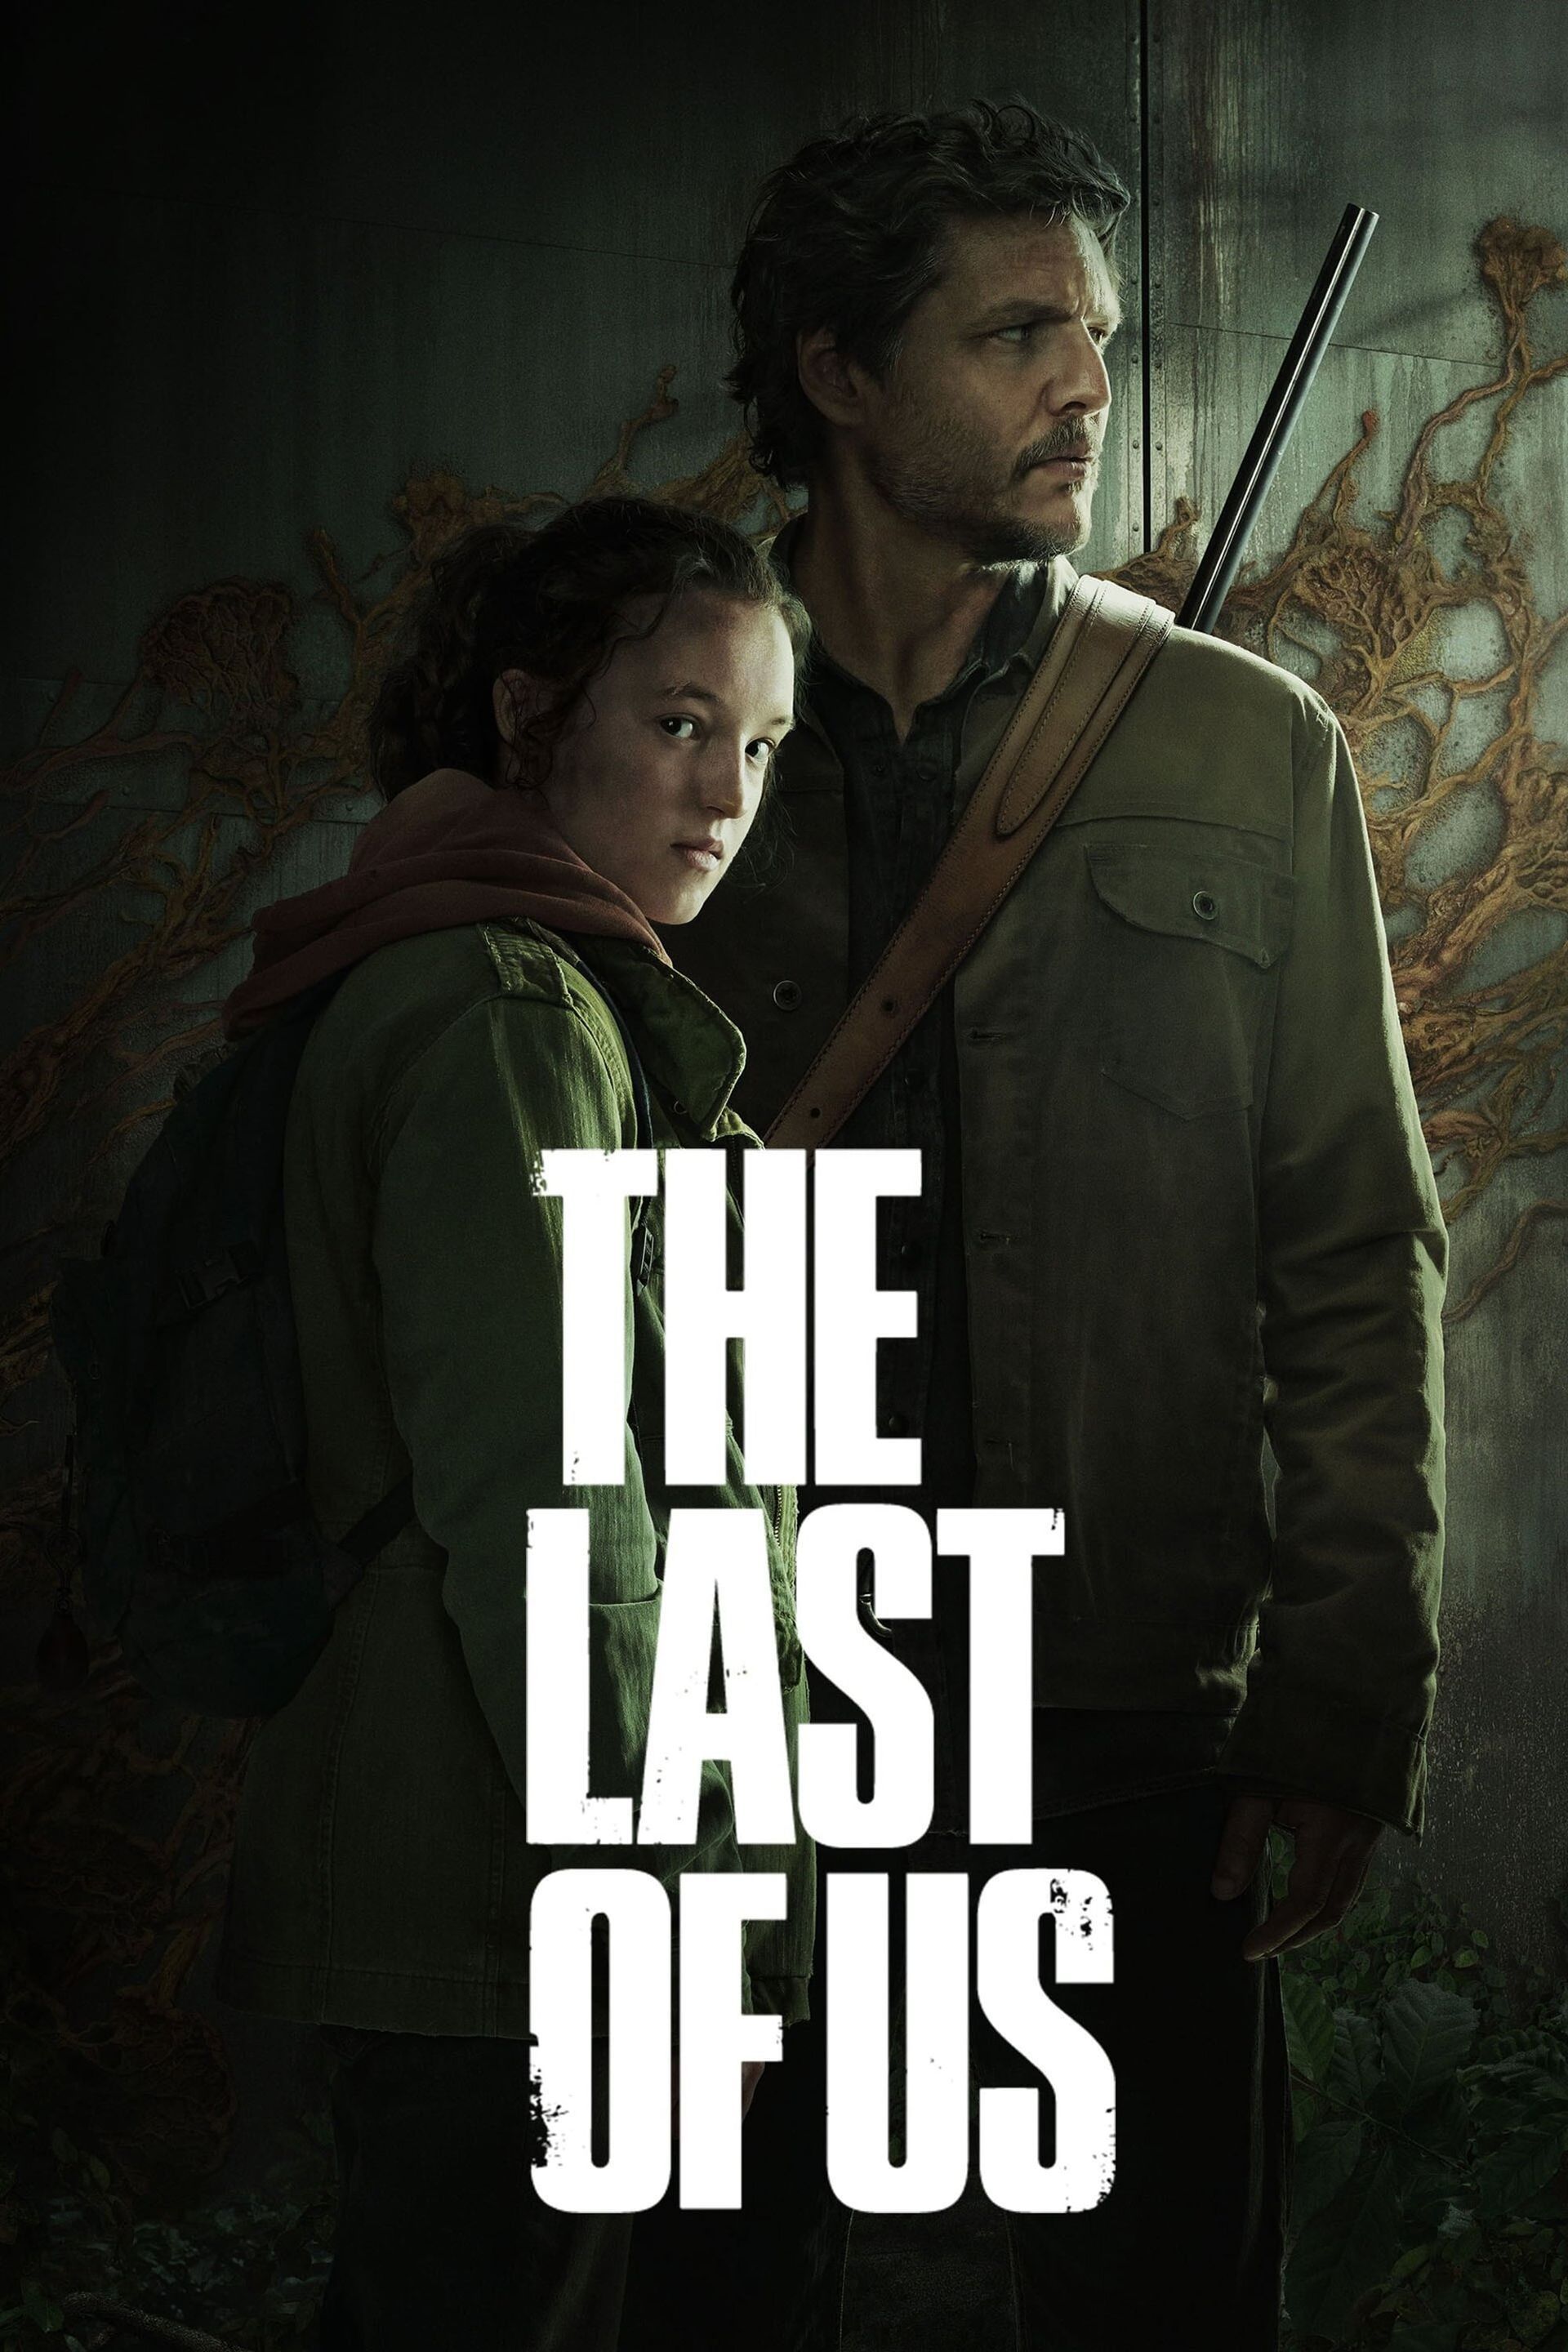 Watch The Last of Us · Season 1 Episode 2 · Infected Full Episode